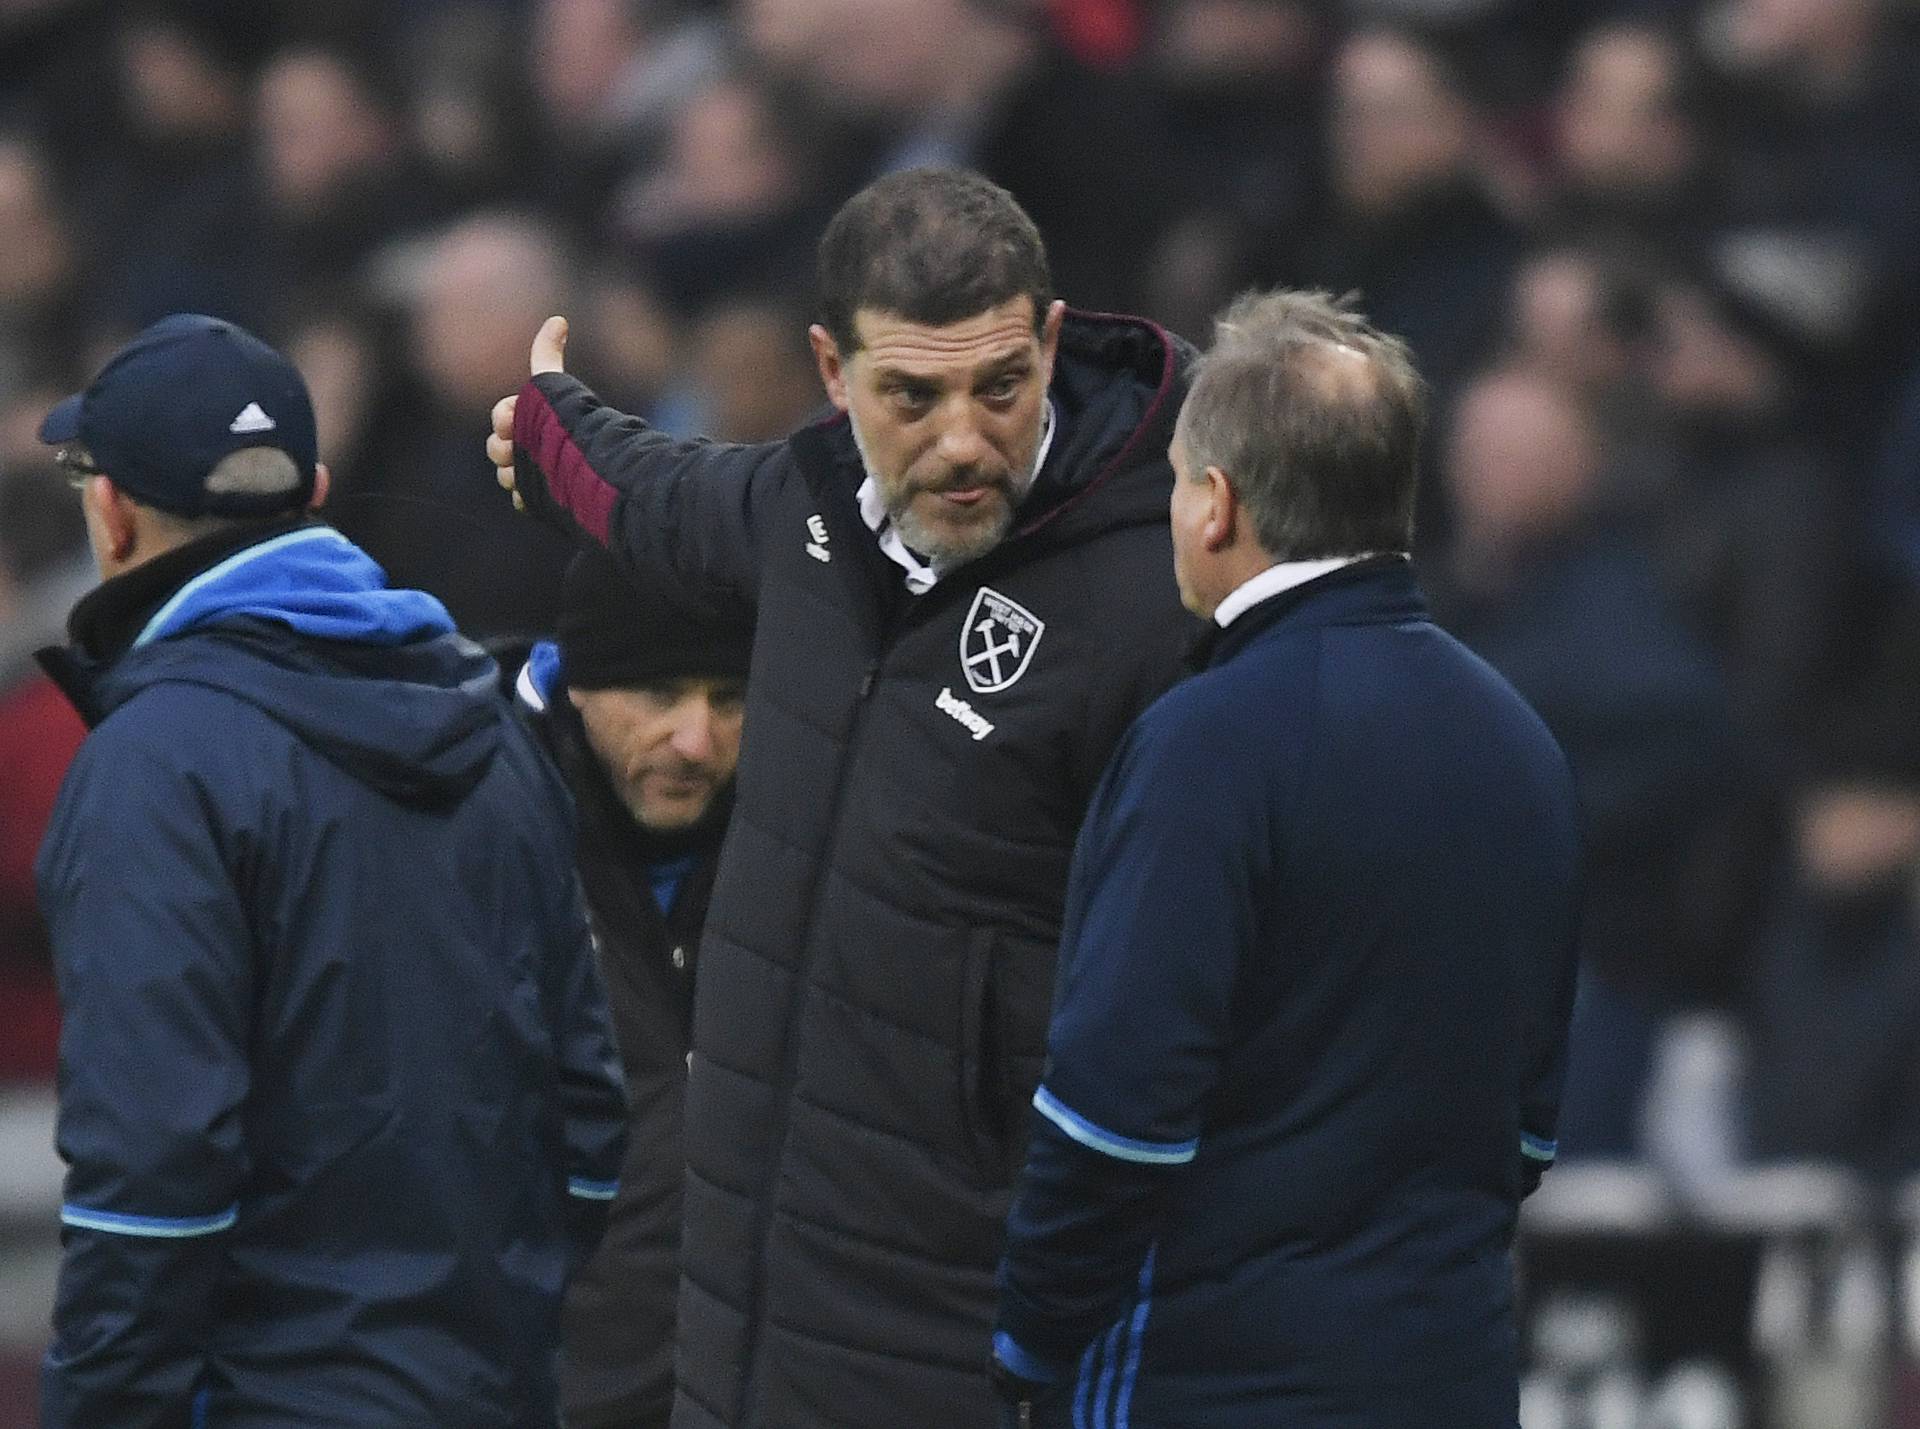 West Ham United manager Slaven Bilic after a disallowed goal